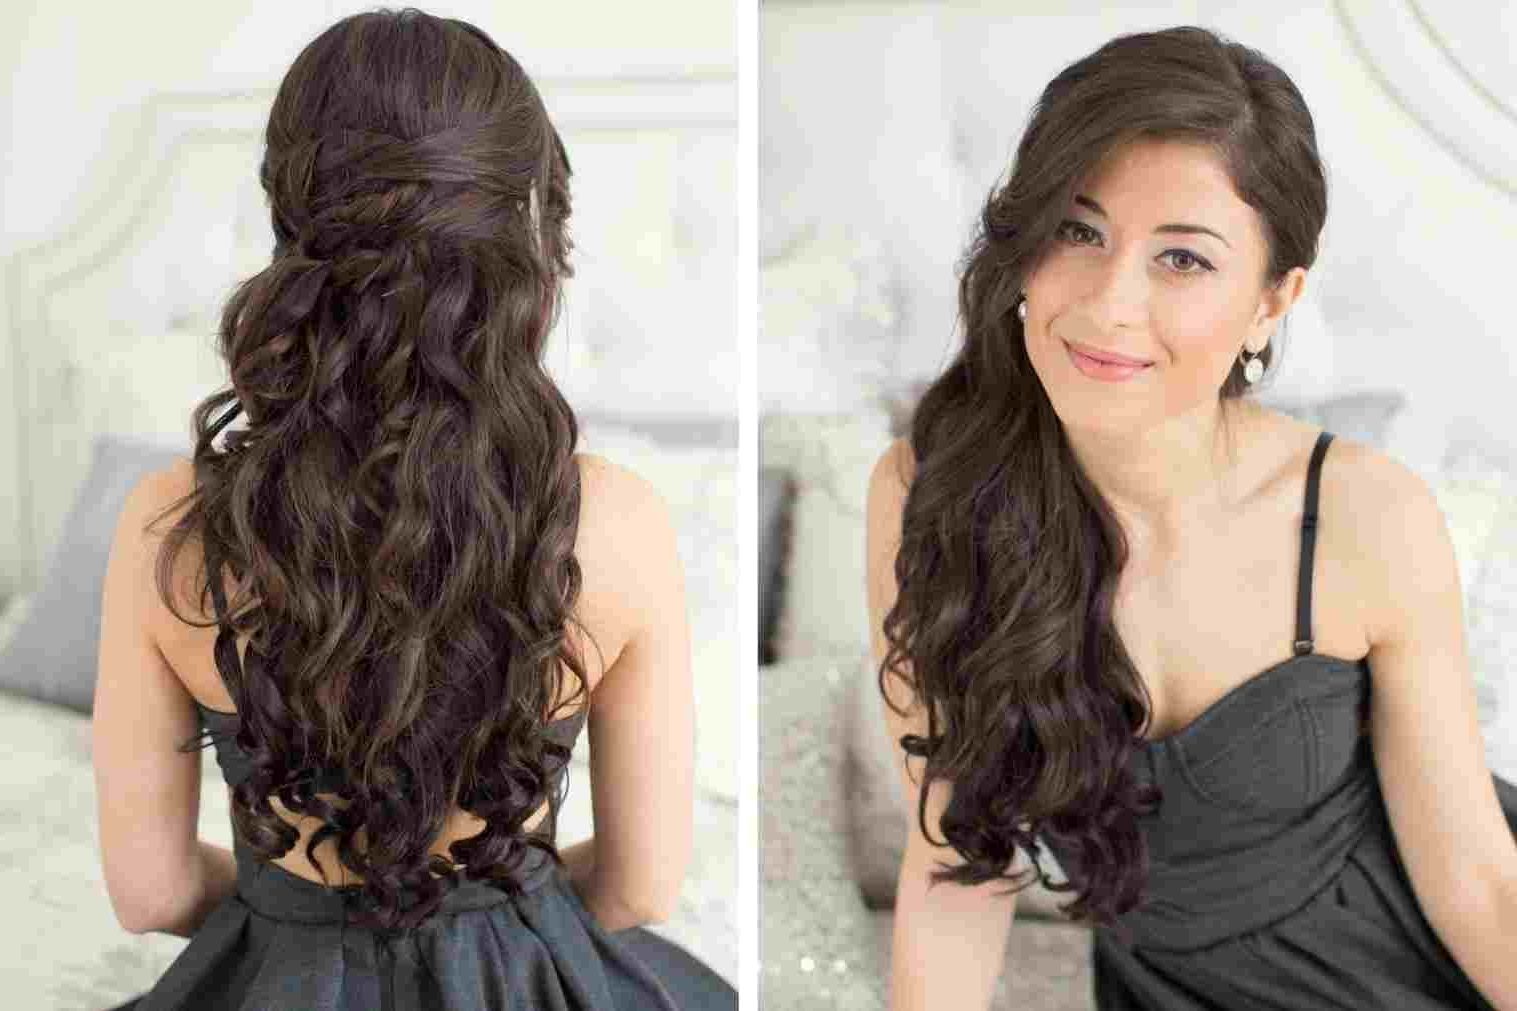 Best And Newest Creative Side Ponytail Hairstyles With Down Hairstyle For Prom Bride Or Rhpinterestcom Side Ponytail Done (View 6 of 20)